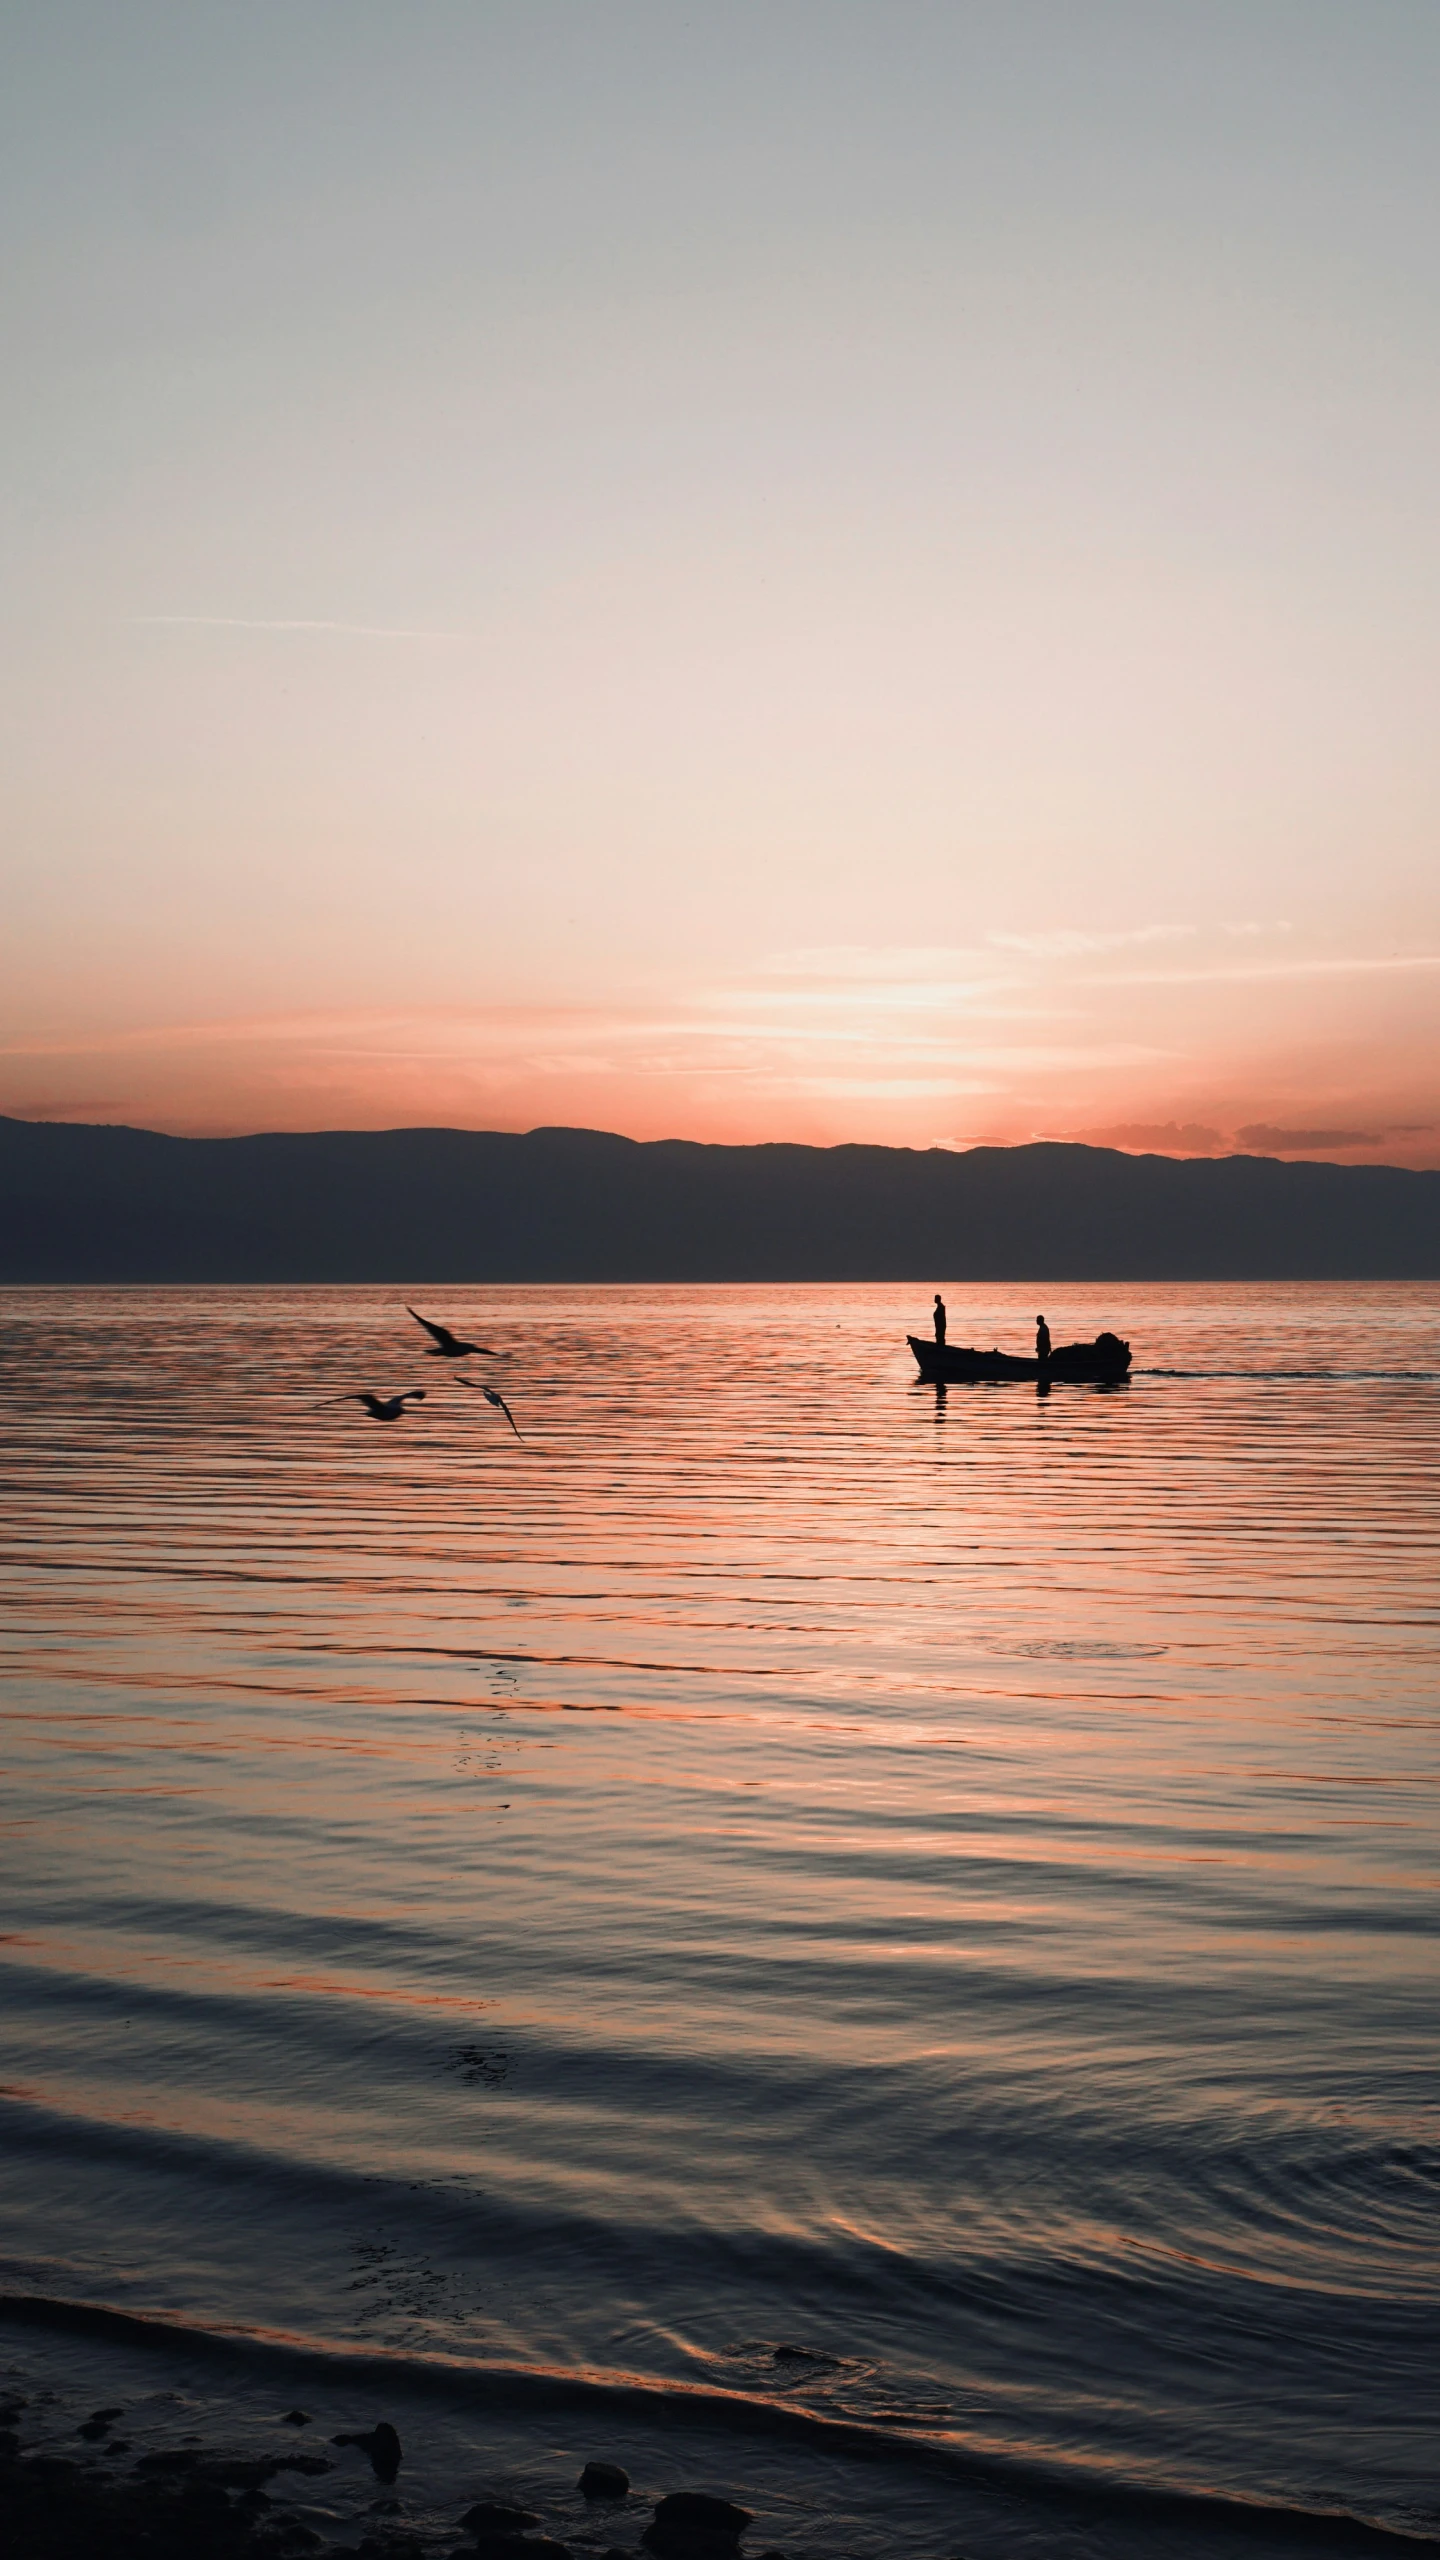 two people in a boat on the water at sunset